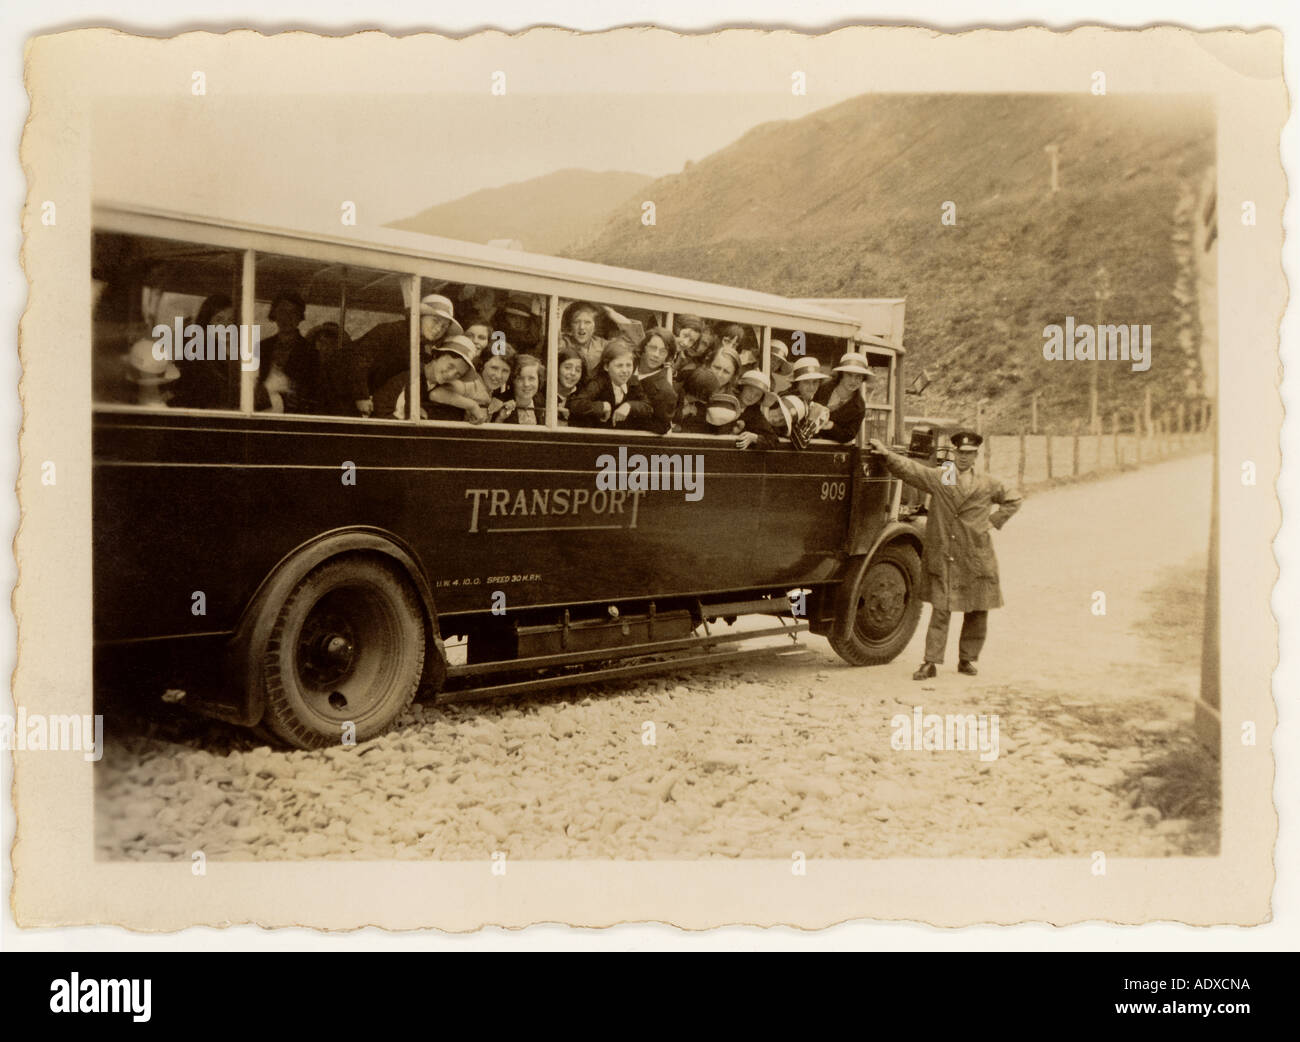 School children on a bus which dates from the 1920's or 1930's on a day trip, pastimes, U.K. Stock Photo